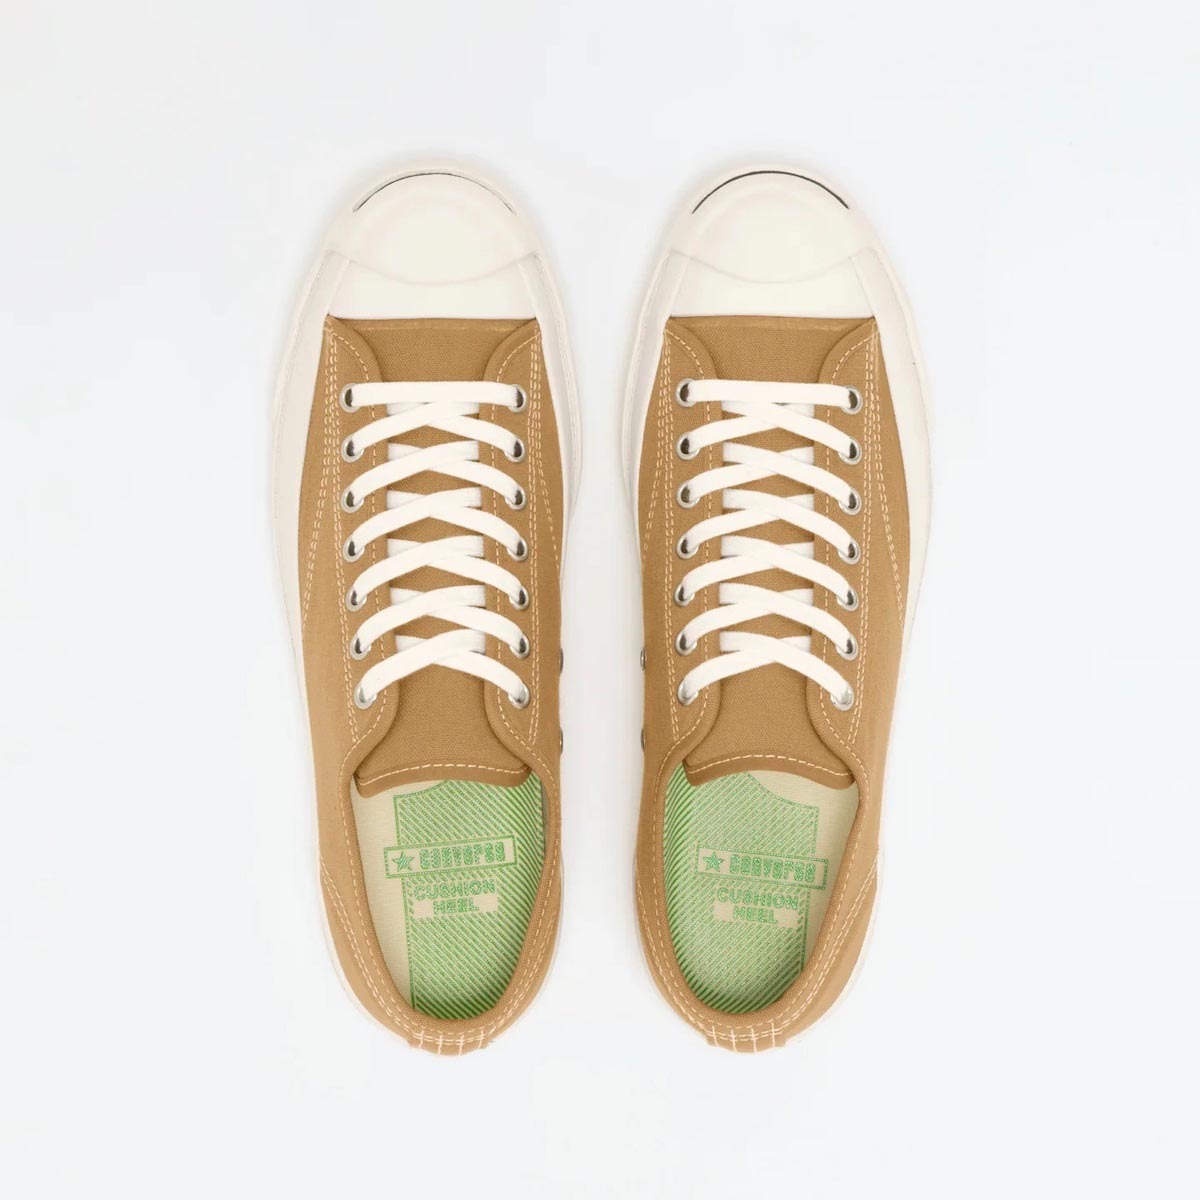 CONVERSE ADDICT / JACK PURCELL CANVAS (Camel)